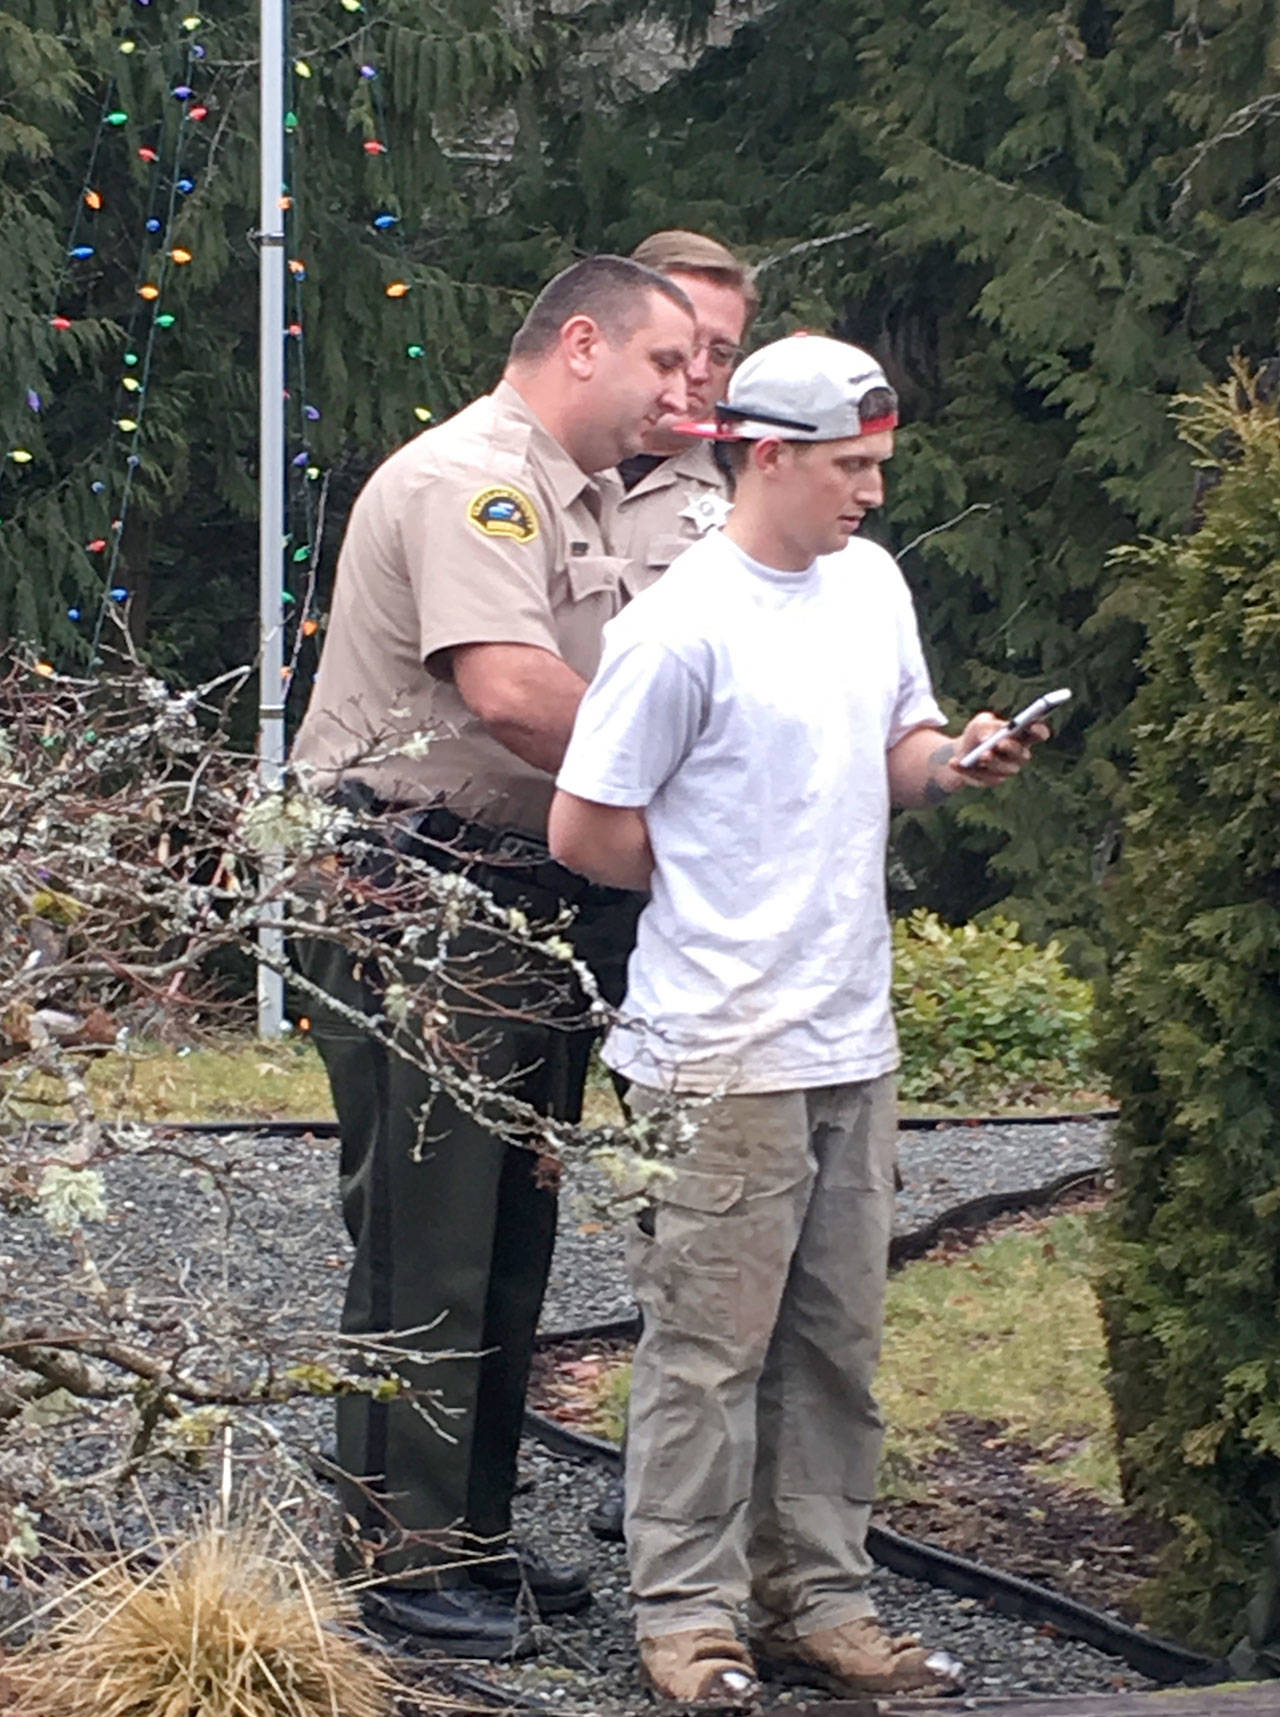 Ethan Anthony Wells, 22, was arrested on an active warrant for armed robbery and possession of child pornography, the Clallam County Sheriff’s Office said.